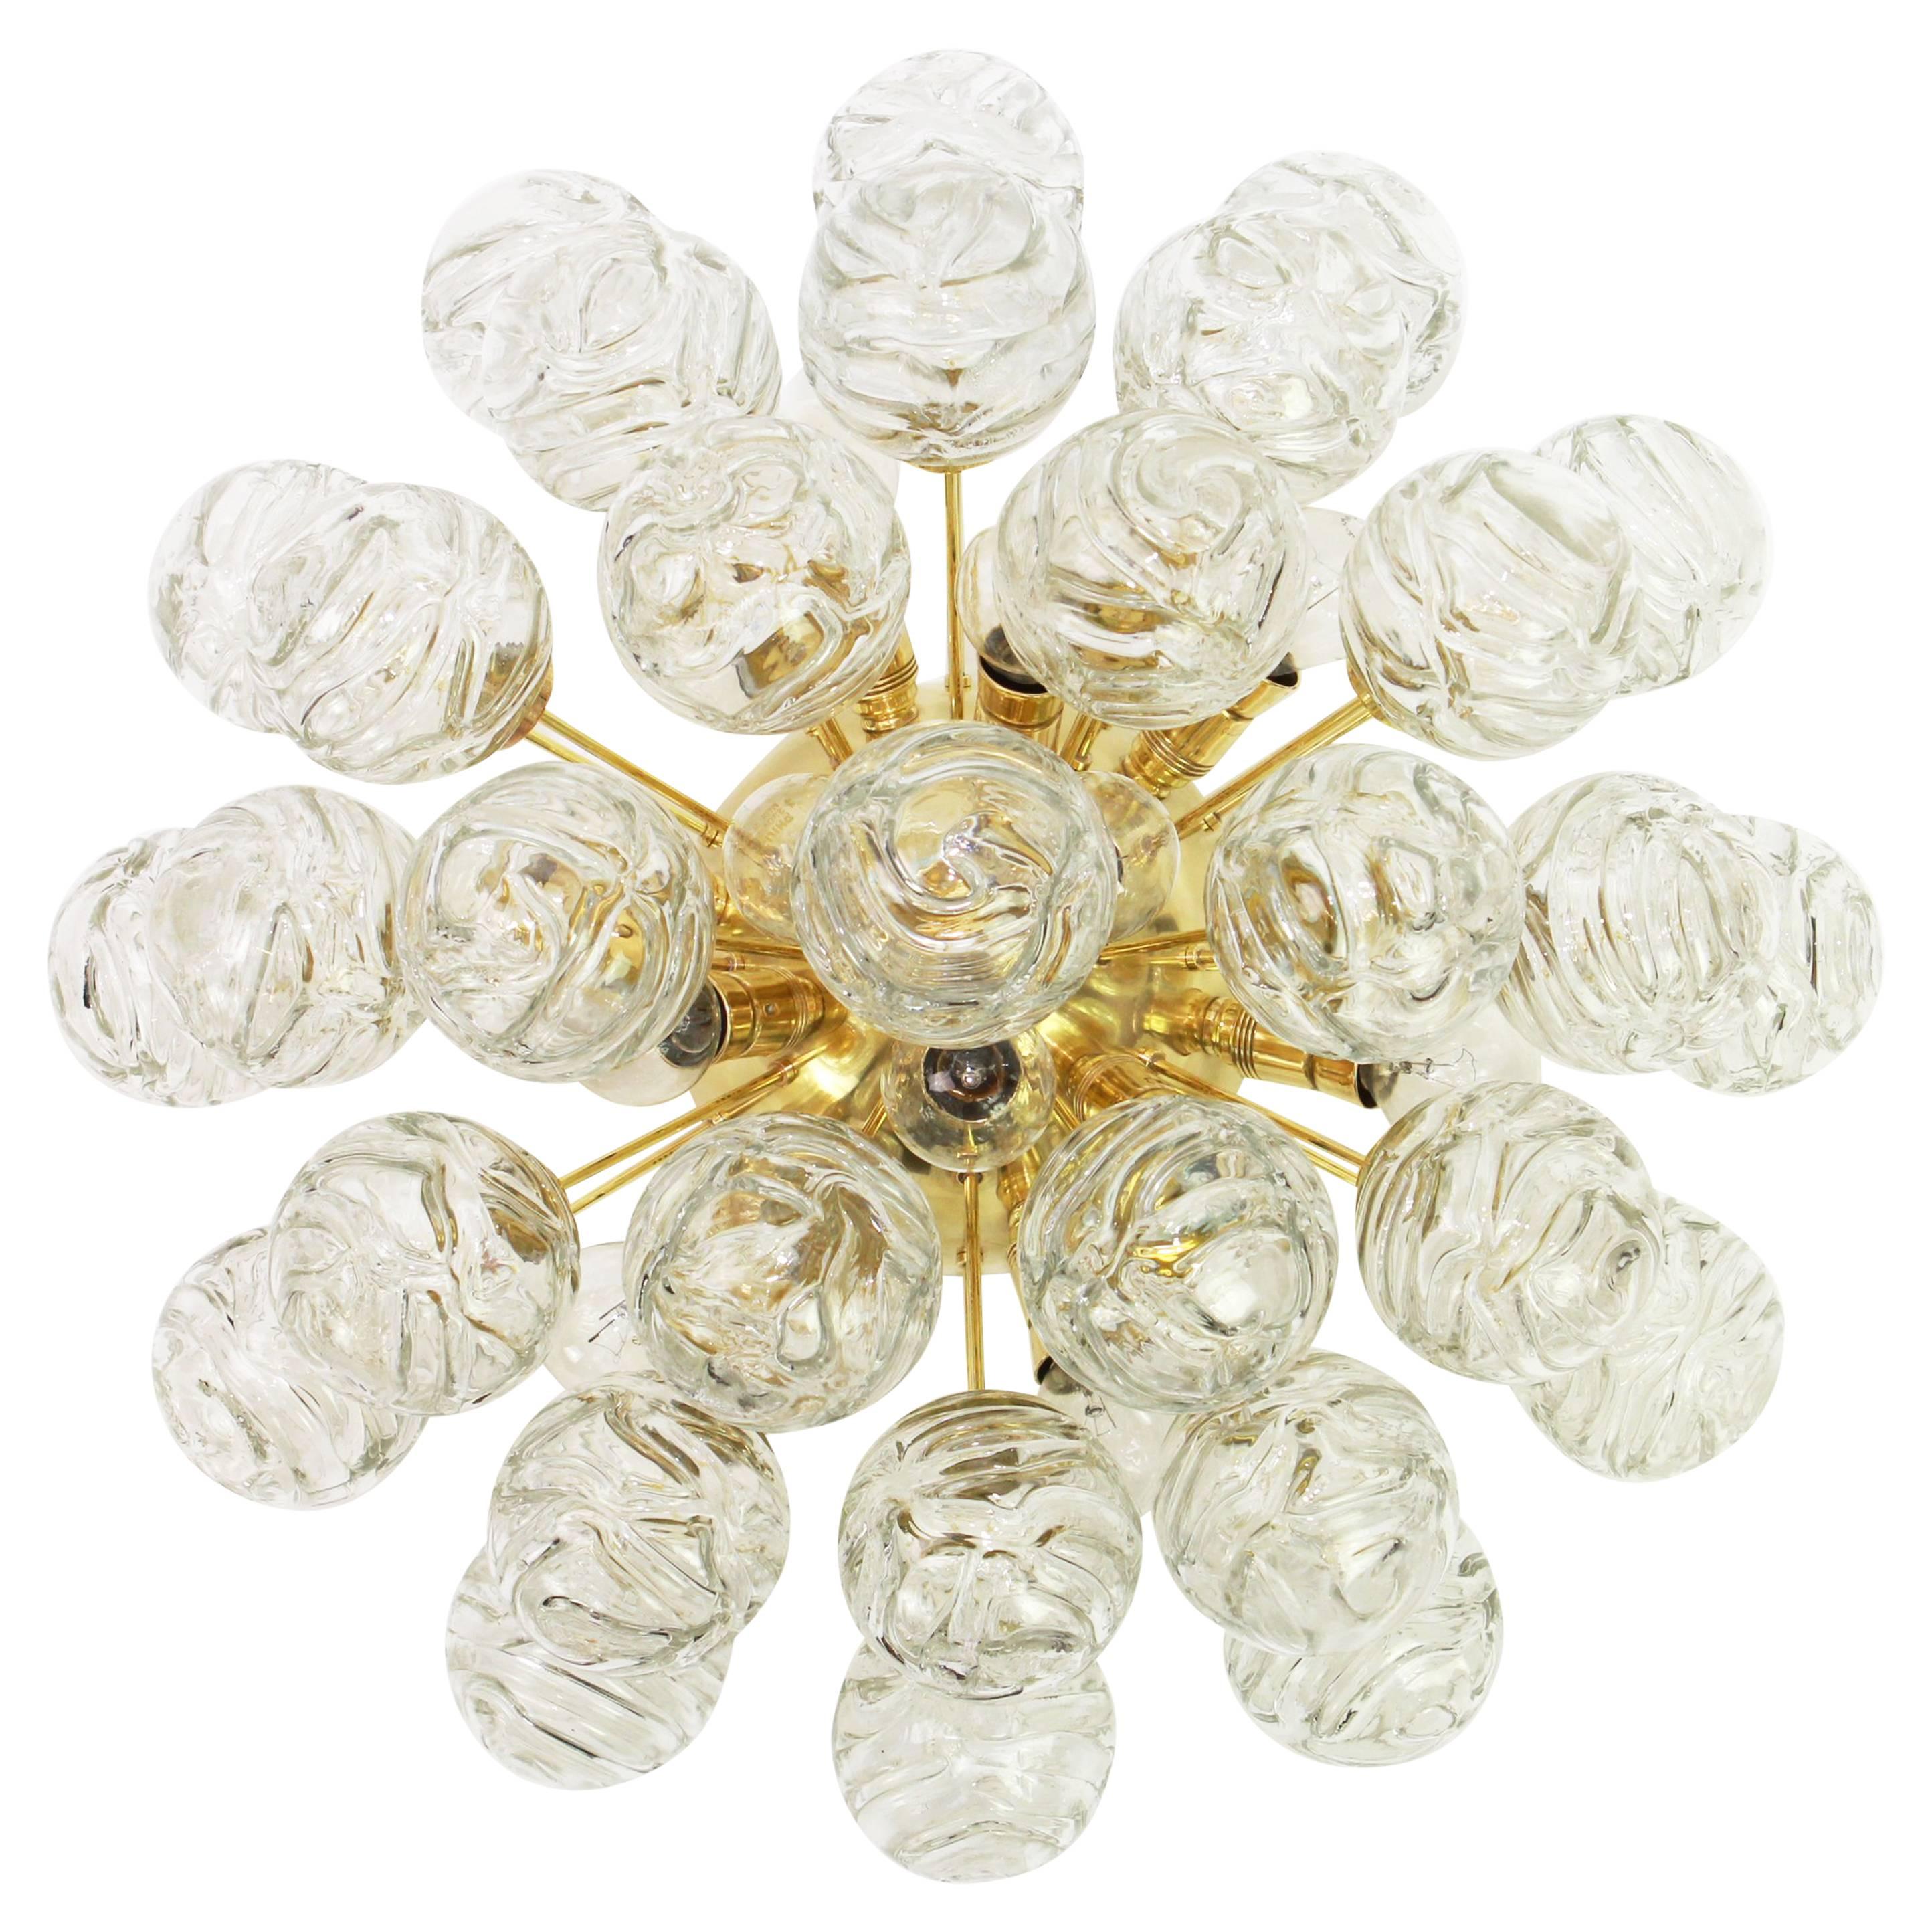 Spectacular Sputnik flushmount with glass snowballs designed by Doria, Germany, 1970s
All glass balls are in good condition.
It needs 12 small size bulbs (E-14 bulbs) up to 40 watts each.
Light bulbs are not included. It is possible to install